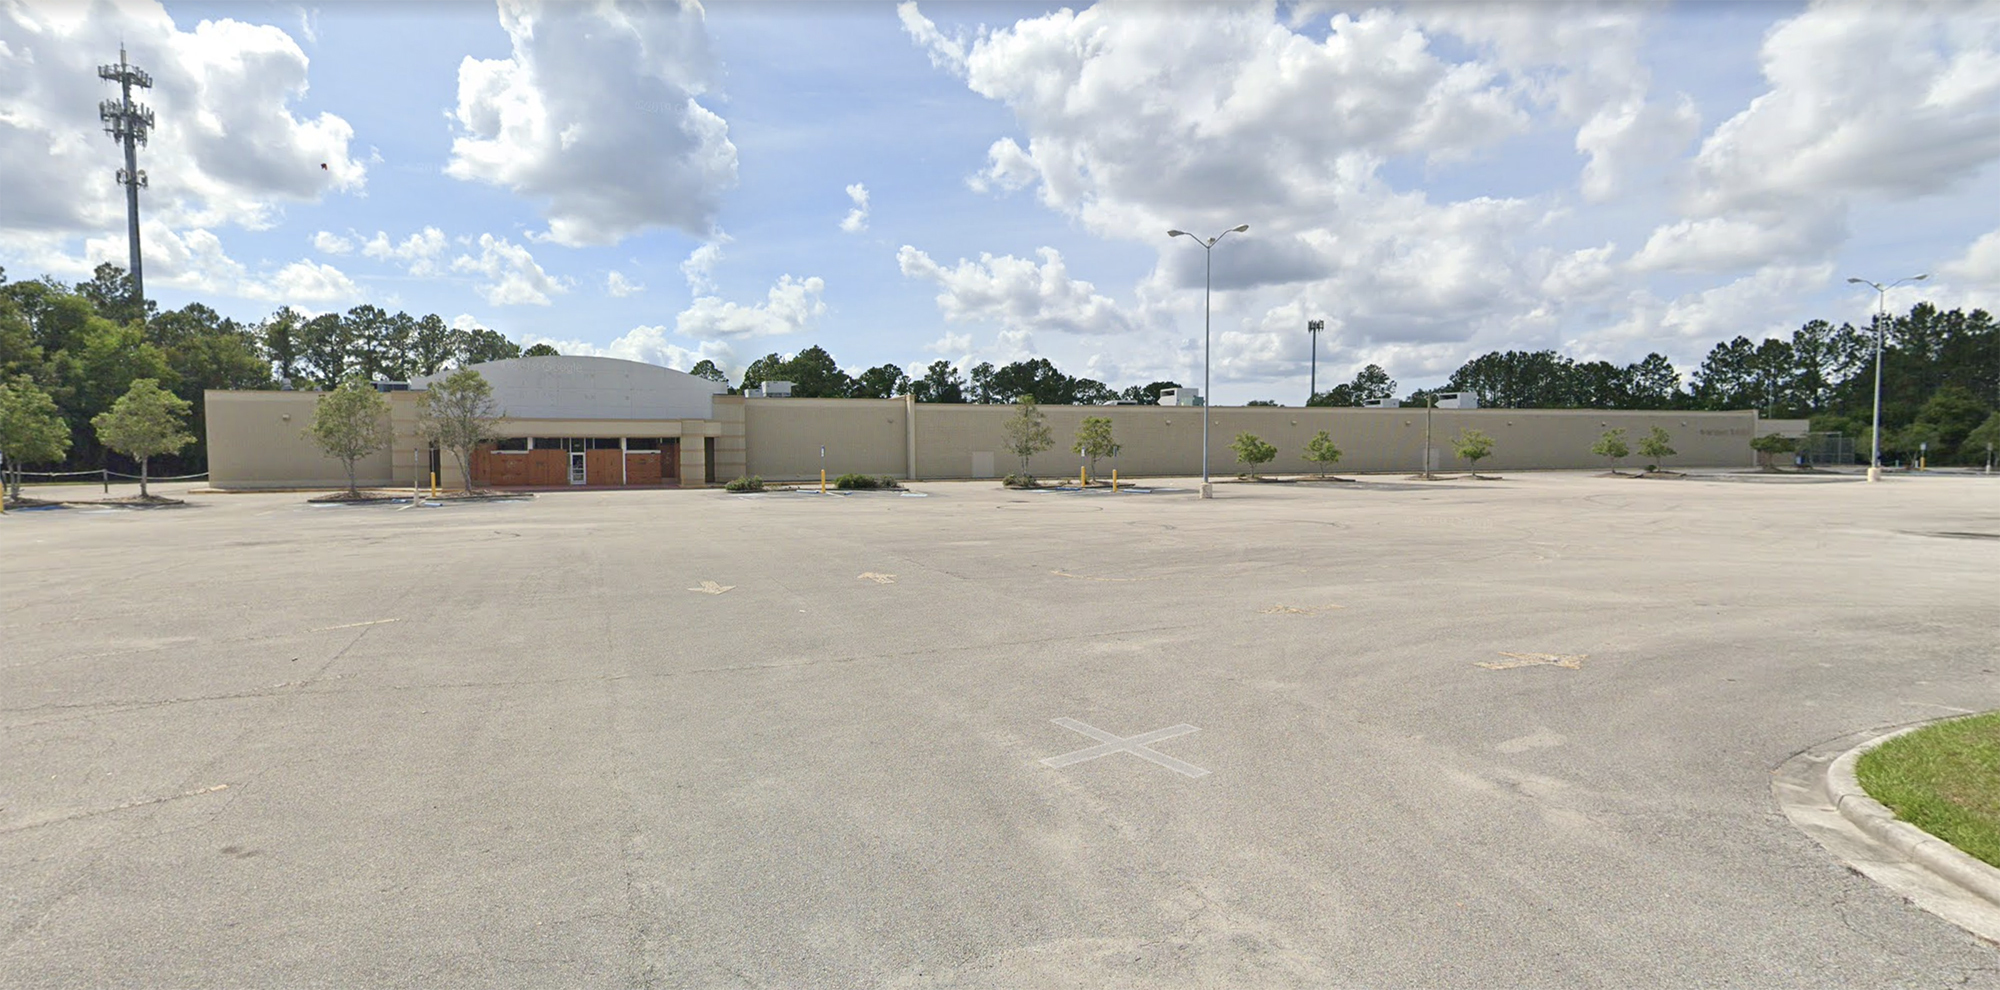 The Kmart closed in 2016.